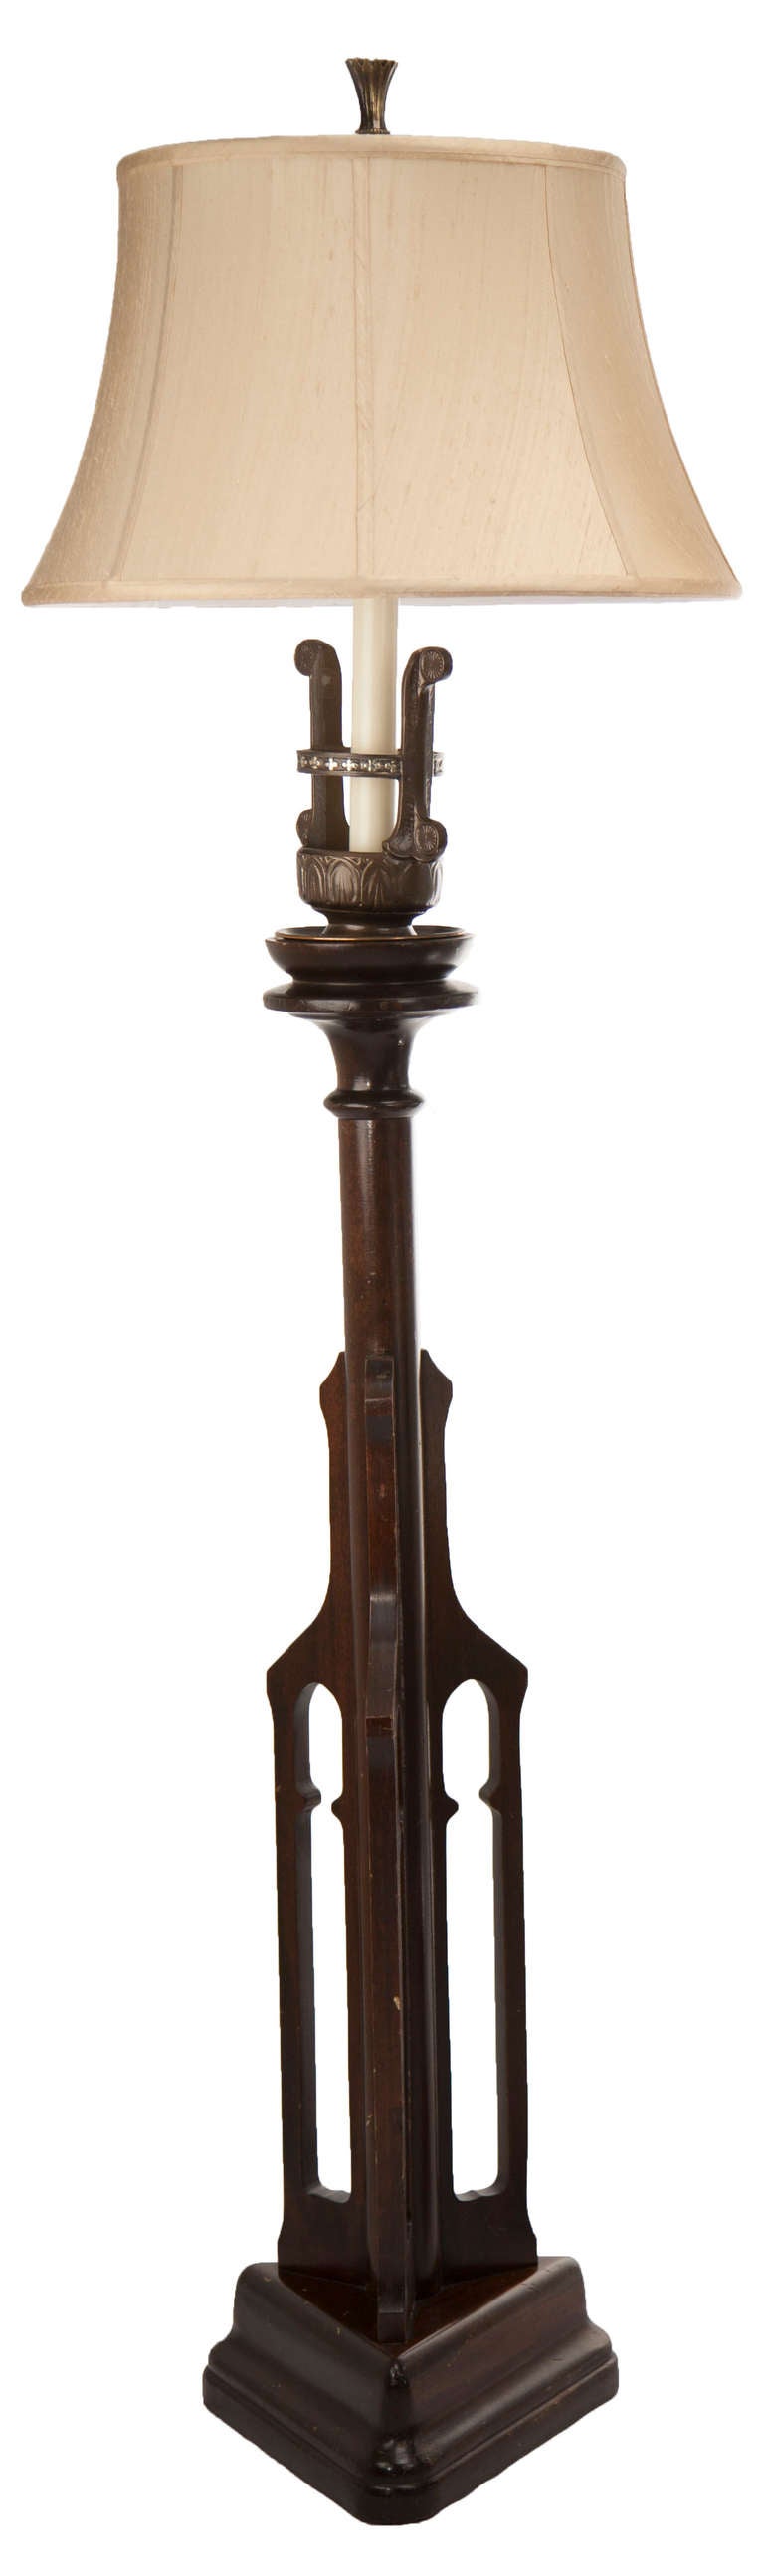 These corpulent floor lamps reflect the somber side of the Art Deco Gothic Revival style. Set upon a weighty tripod base three pierced carved side panels reflect a lancet arch motif.  The mogul sockets are cast bronze and decorated with a quatrefoil